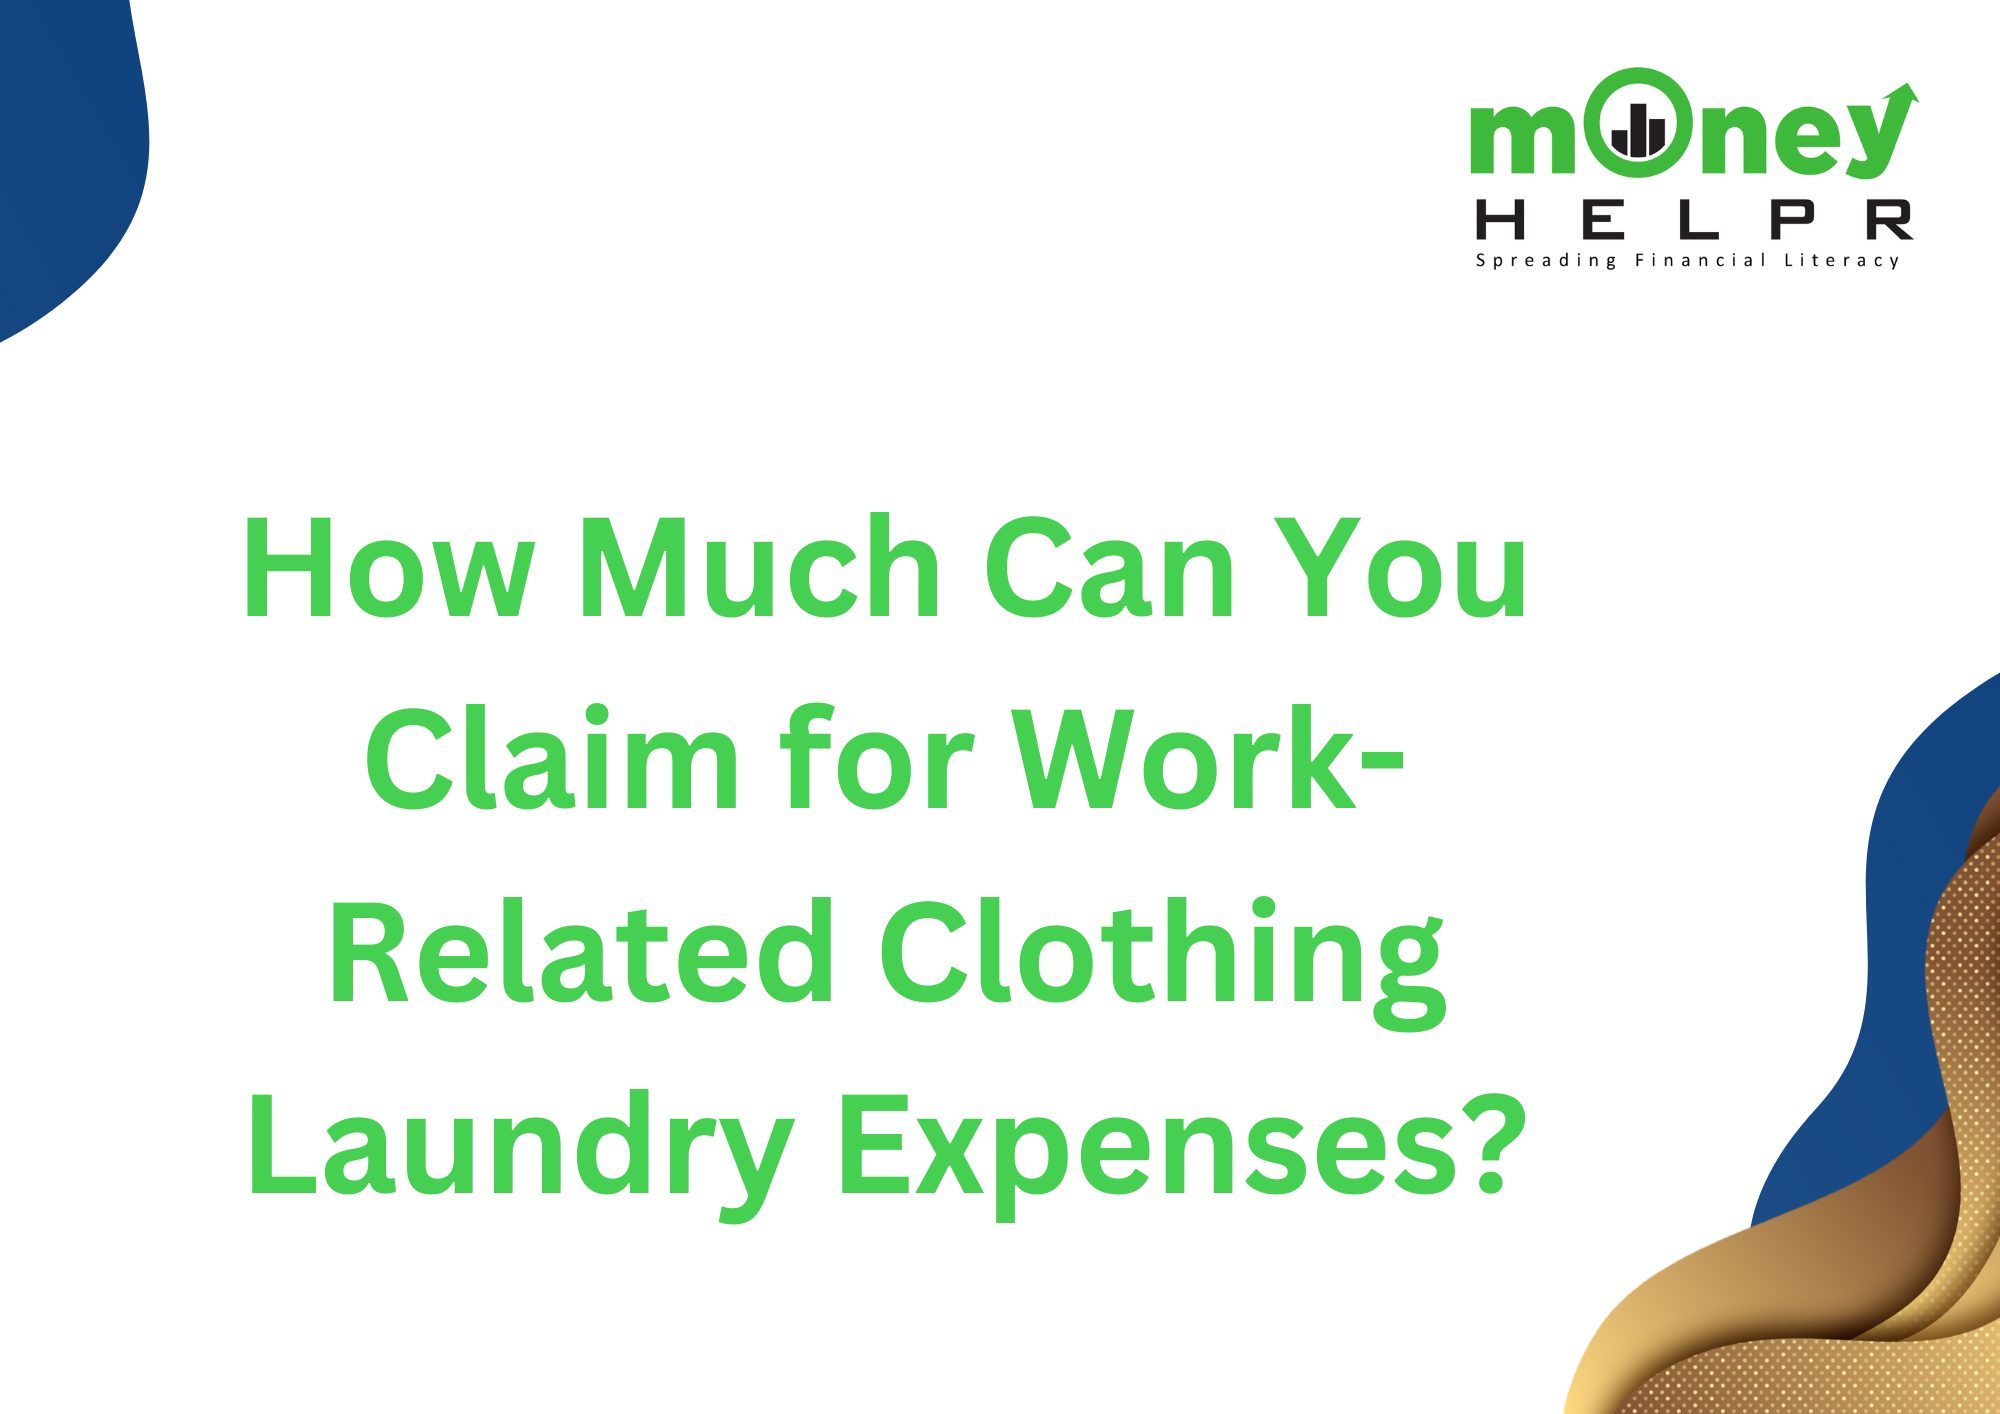 How Much Can You Claim for Work-Related Clothing Laundry Expenses?